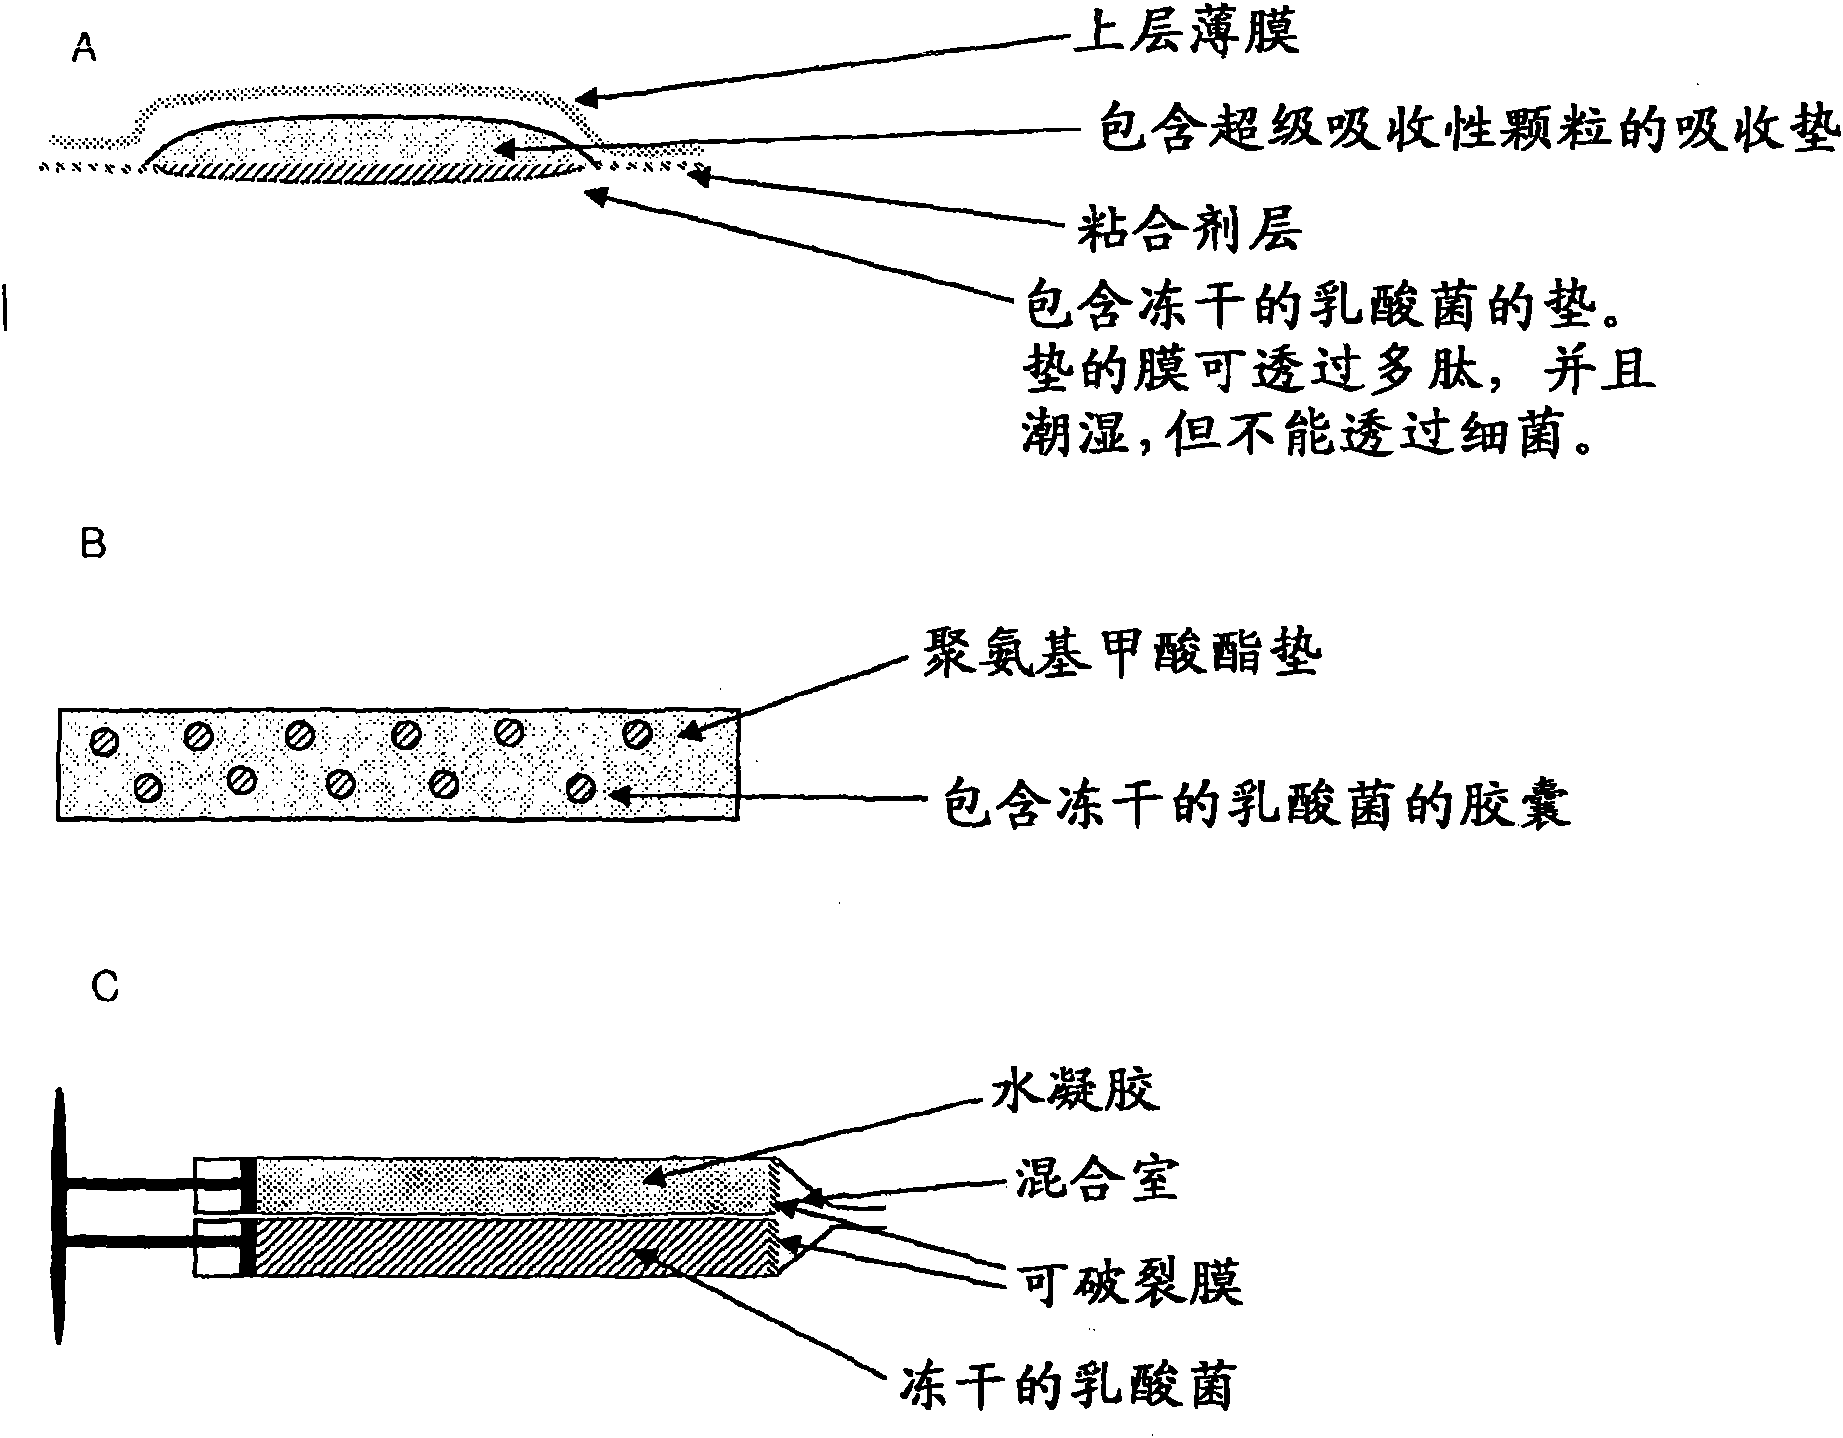 Wound or tissue dressing comprising lactic acid bacteria